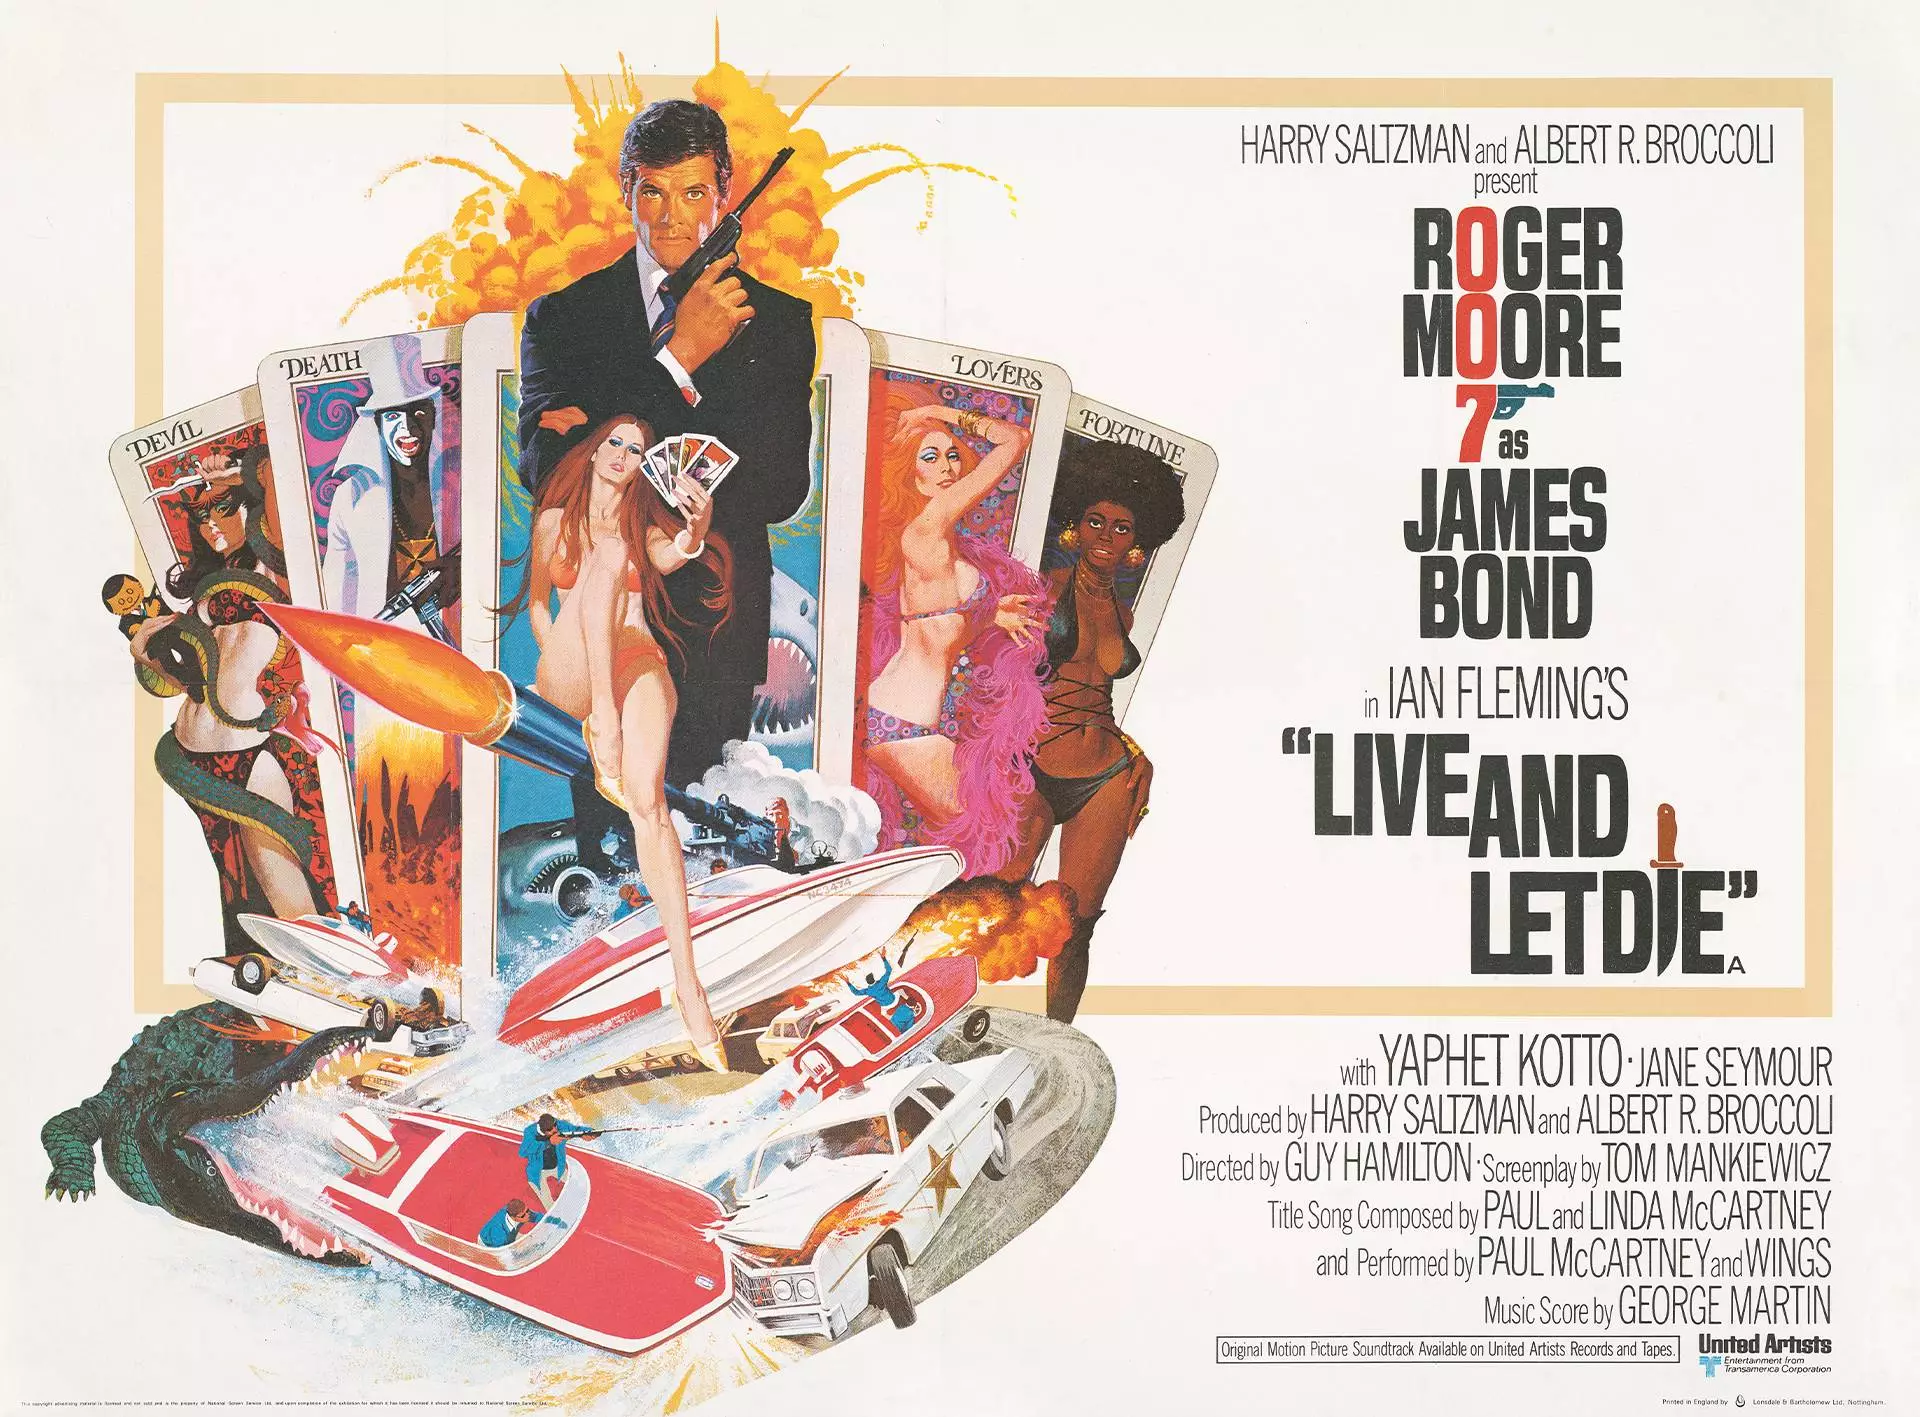 Rodger Moore's first Bond film was 'Live And Let Die' in 1973. (